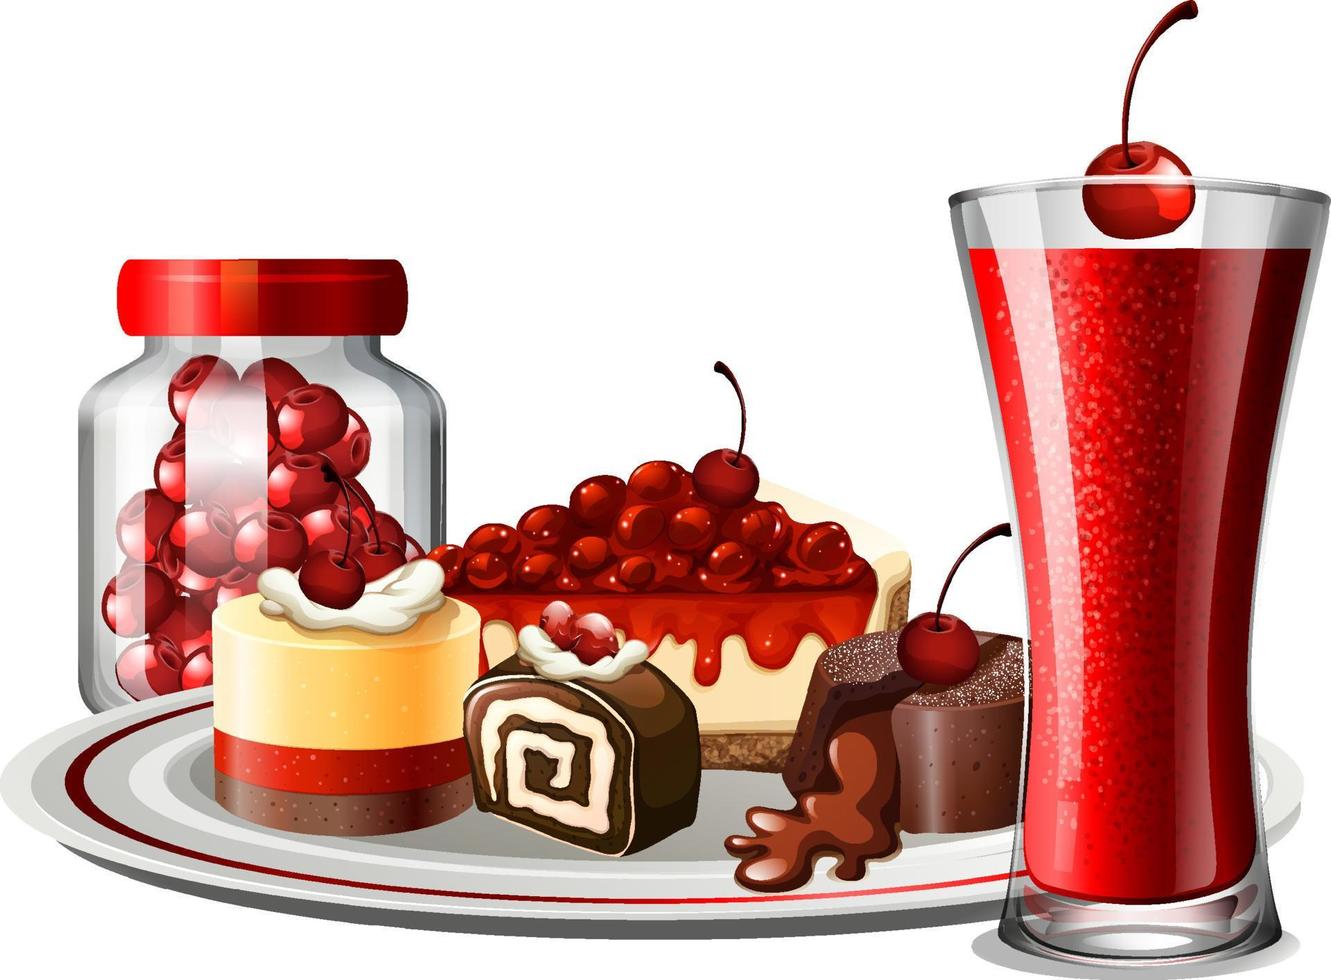 Cherry bakery and beverage set vector